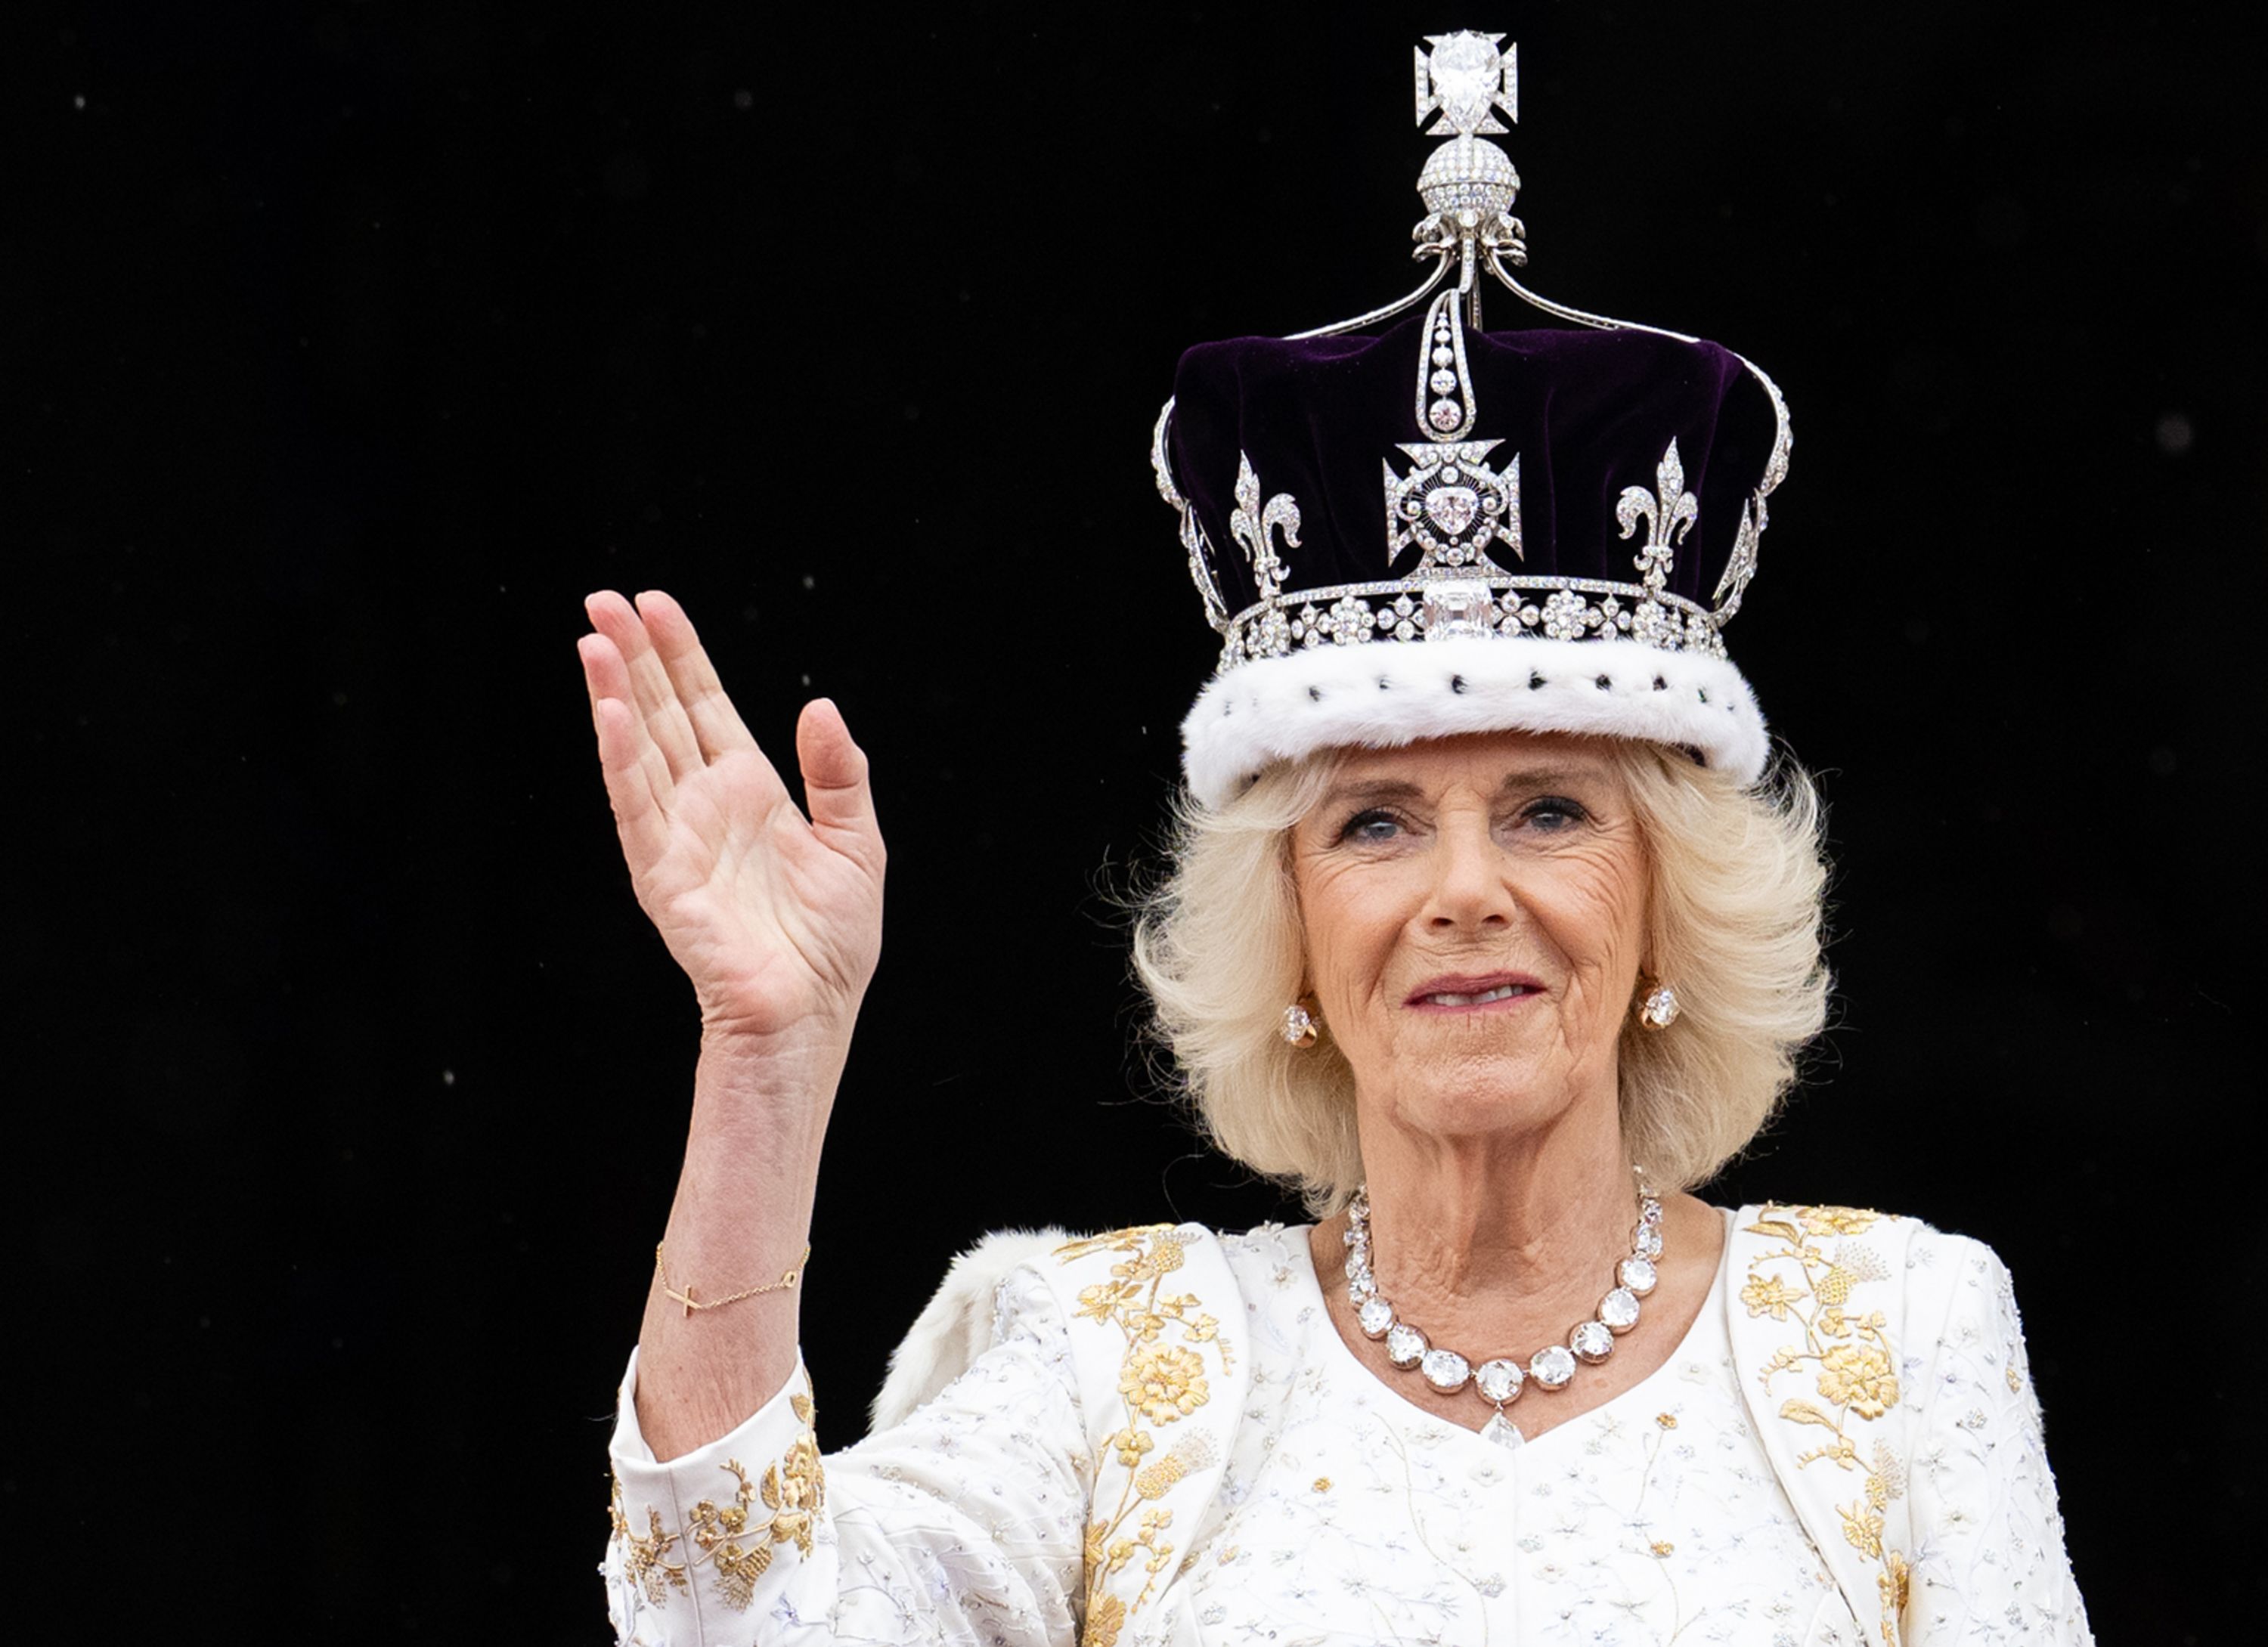 Britain's Queen Camilla waves from the balcony of Buckingham Palace after a <a href="index.php?page=&url=http%3A%2F%2Fwww.cnn.com%2F2023%2F05%2F06%2Fuk%2Fgallery%2Fcoronation-king-charles%2Findex.html" target="_blank">coronation ceremony</a> in May 2023.